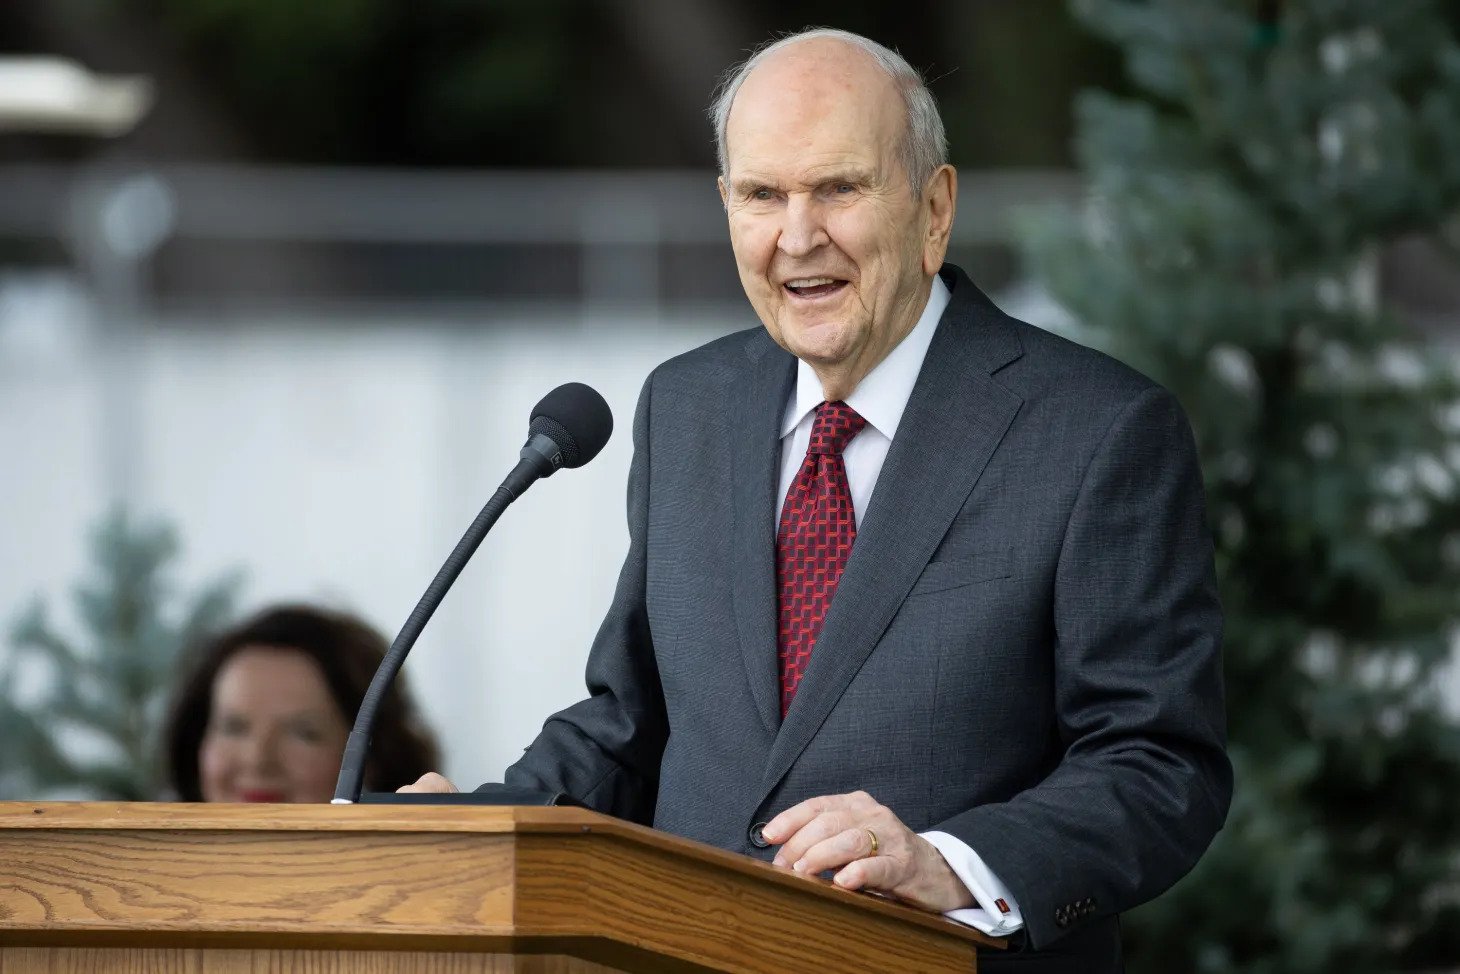 President Nelson wearing a gray suit and red tie and speaking from a pulpit outside.